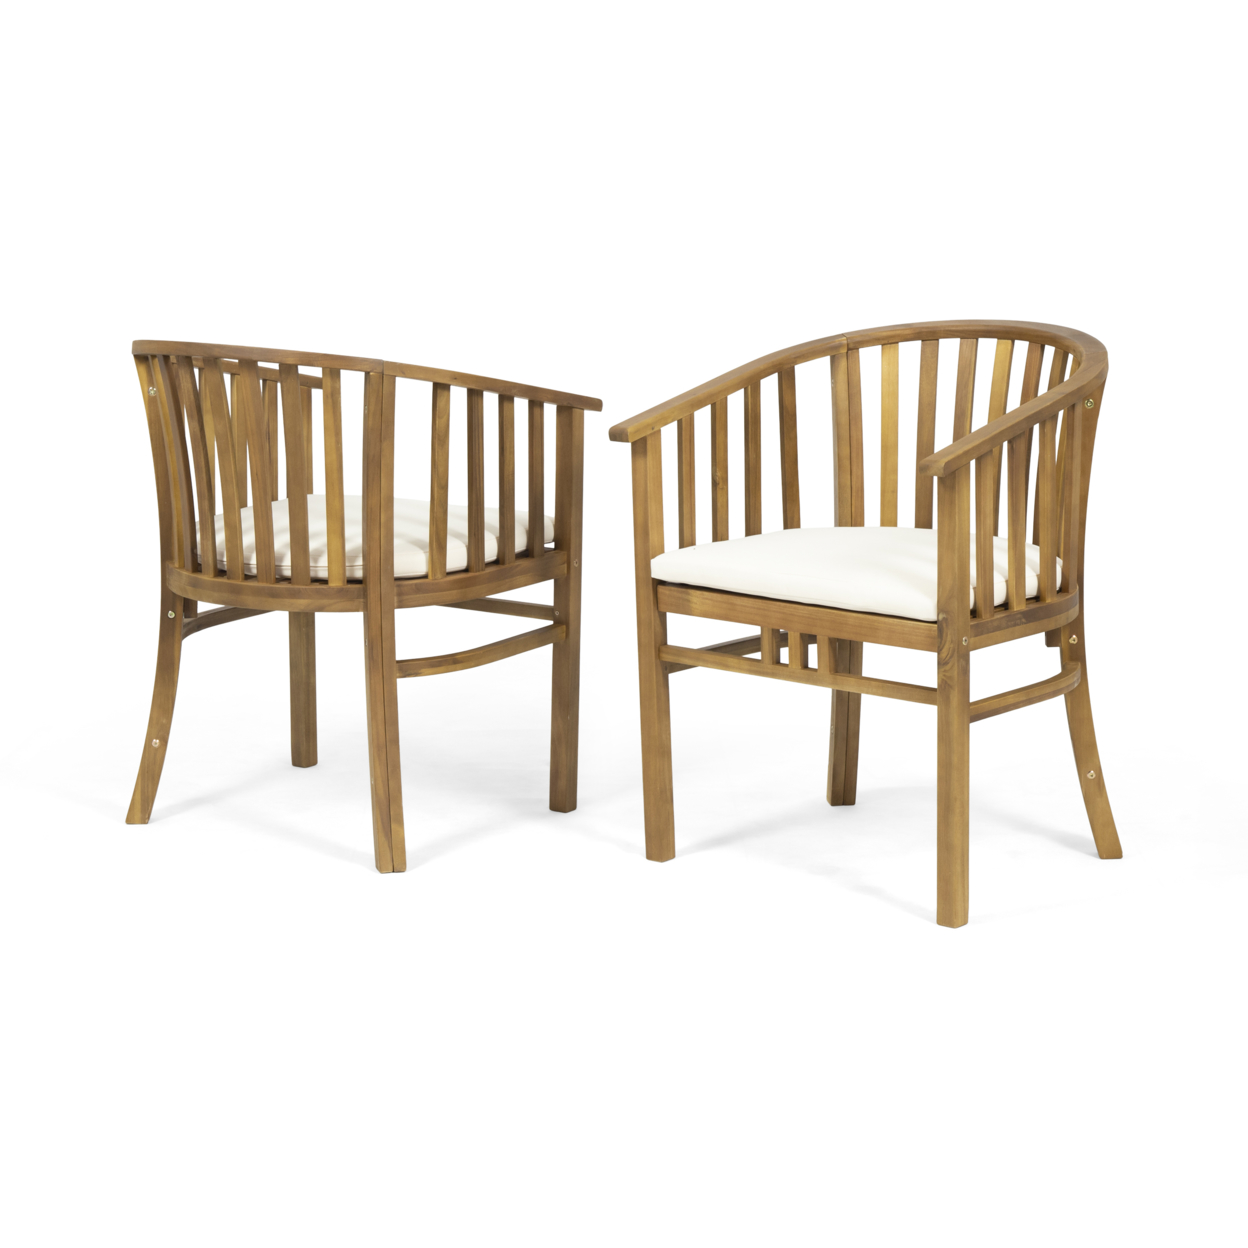 Nola Outdoor Wooden Dining Chairs With Cushions (Set Of 2) - Cream + Teak Finish